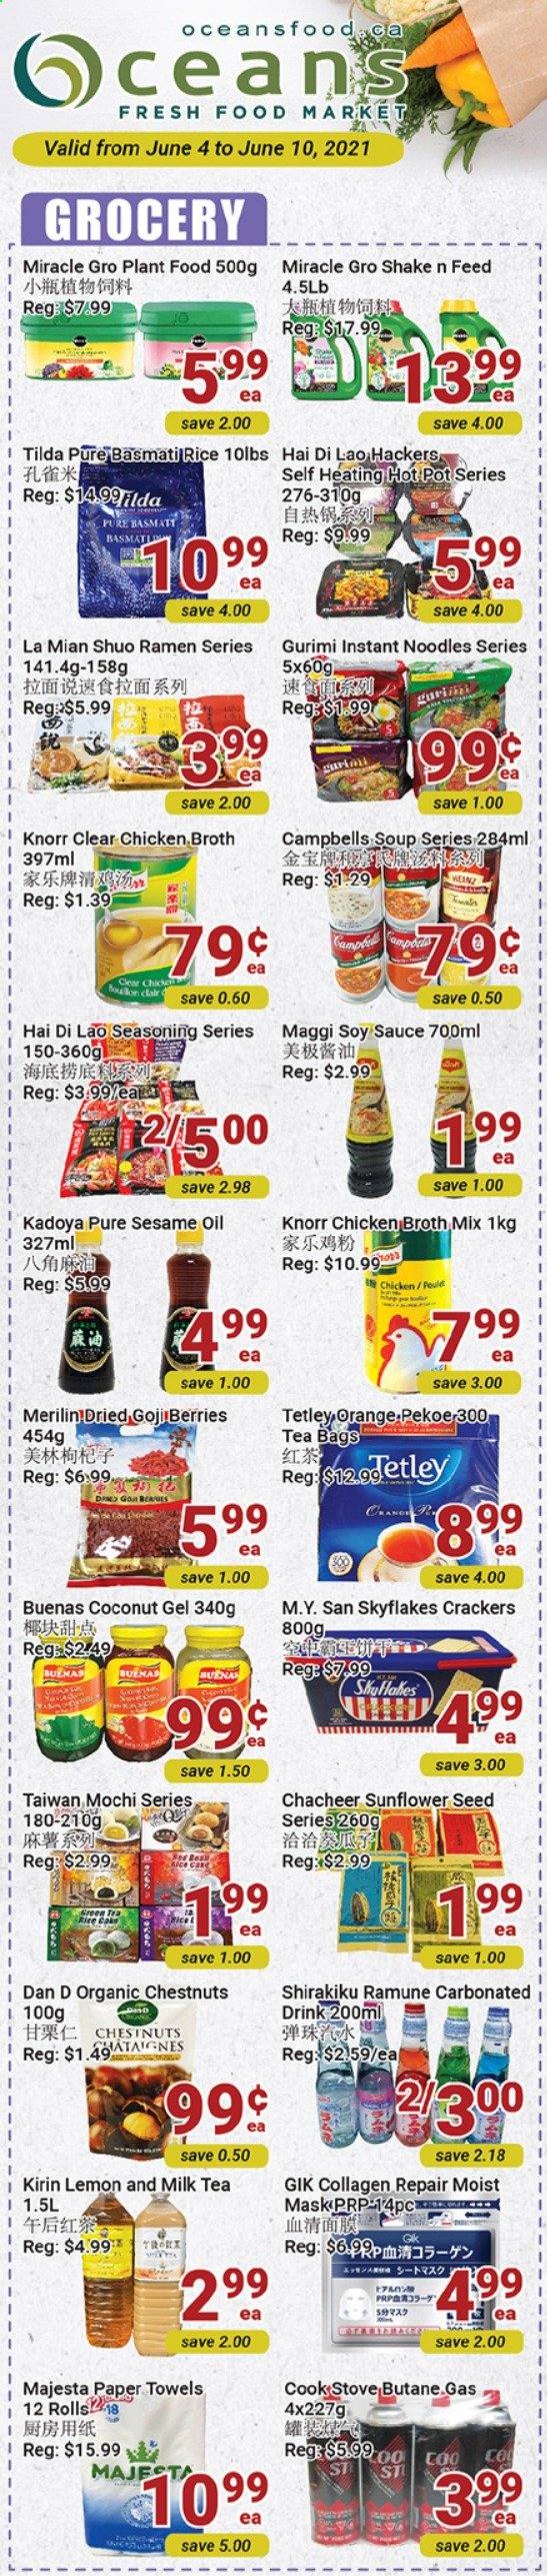 thumbnail - Oceans Flyer - June 04, 2021 - June 10, 2021 - Sales products - coconut, ramen, soup, instant noodles, sauce, noodles, shake, crackers, Skyflakes, chicken broth, Maggi, broth, basmati rice, rice, spice, soy sauce, sesame oil, oil, chestnuts, goji, tea bags, kitchen towels, paper towels, Knorr. Page 1.